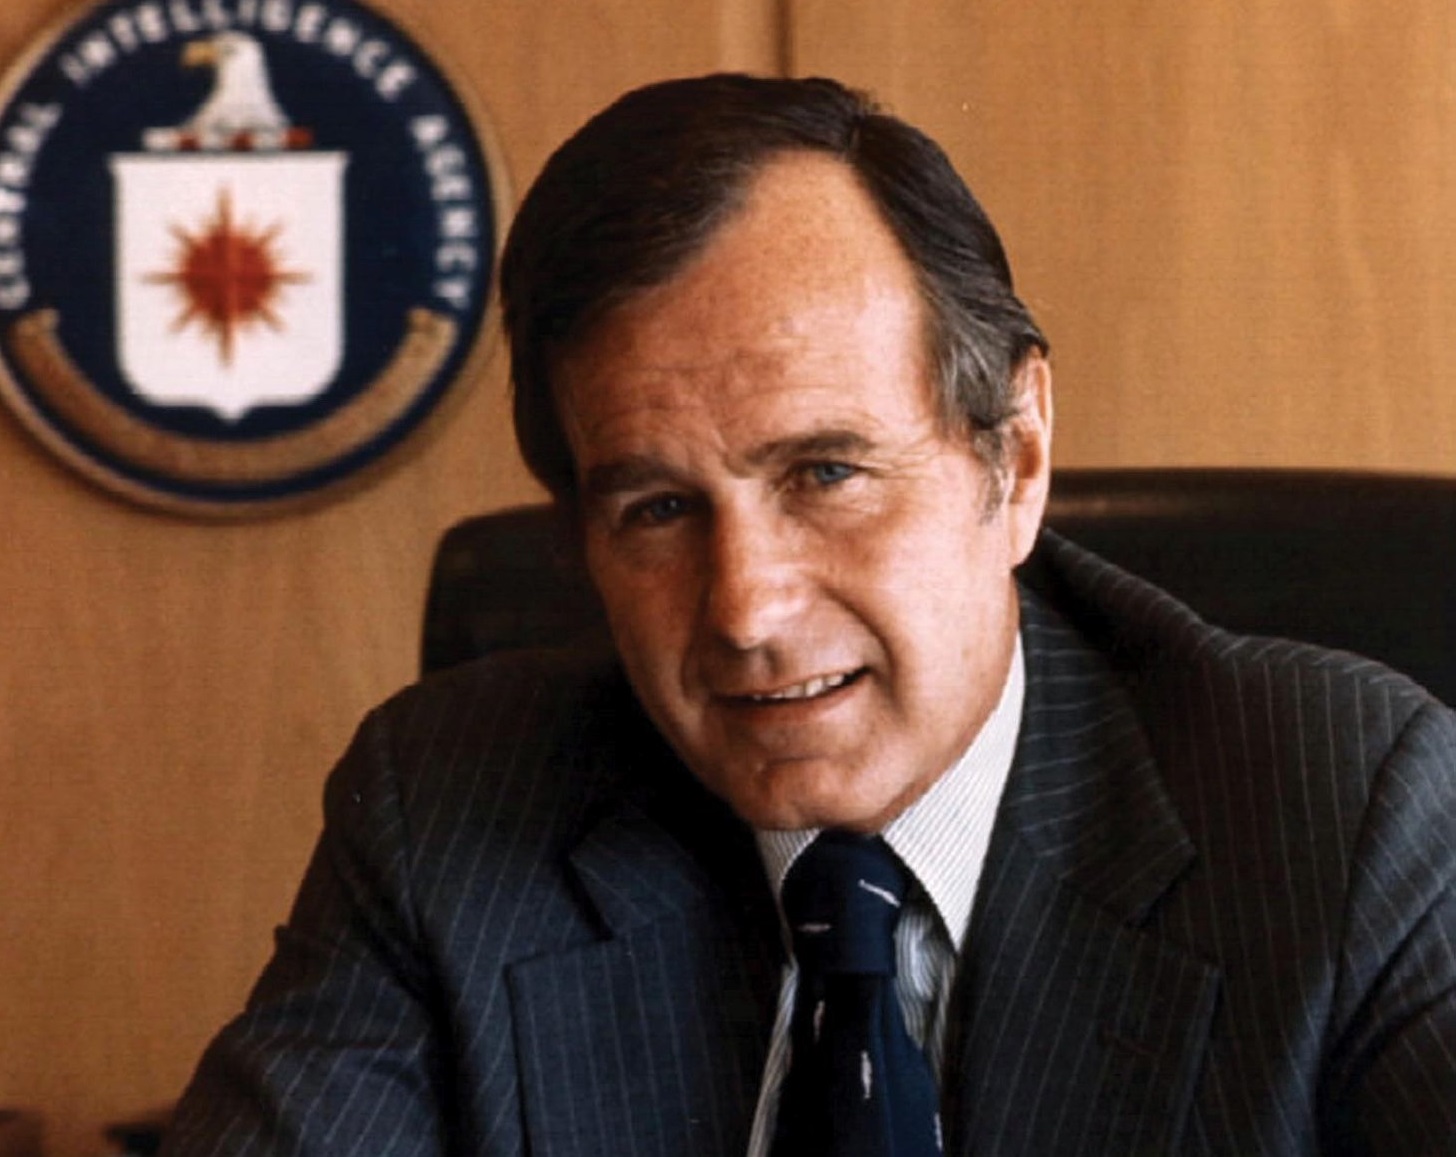 <p>President George H.W. Bush frequently used the term "A new world order" during his time in office in the early 1990s. His words spoke on the importance of international cooperation to address global issues like the Gulf War and the downfall of communism in Eastern Europe.</p>